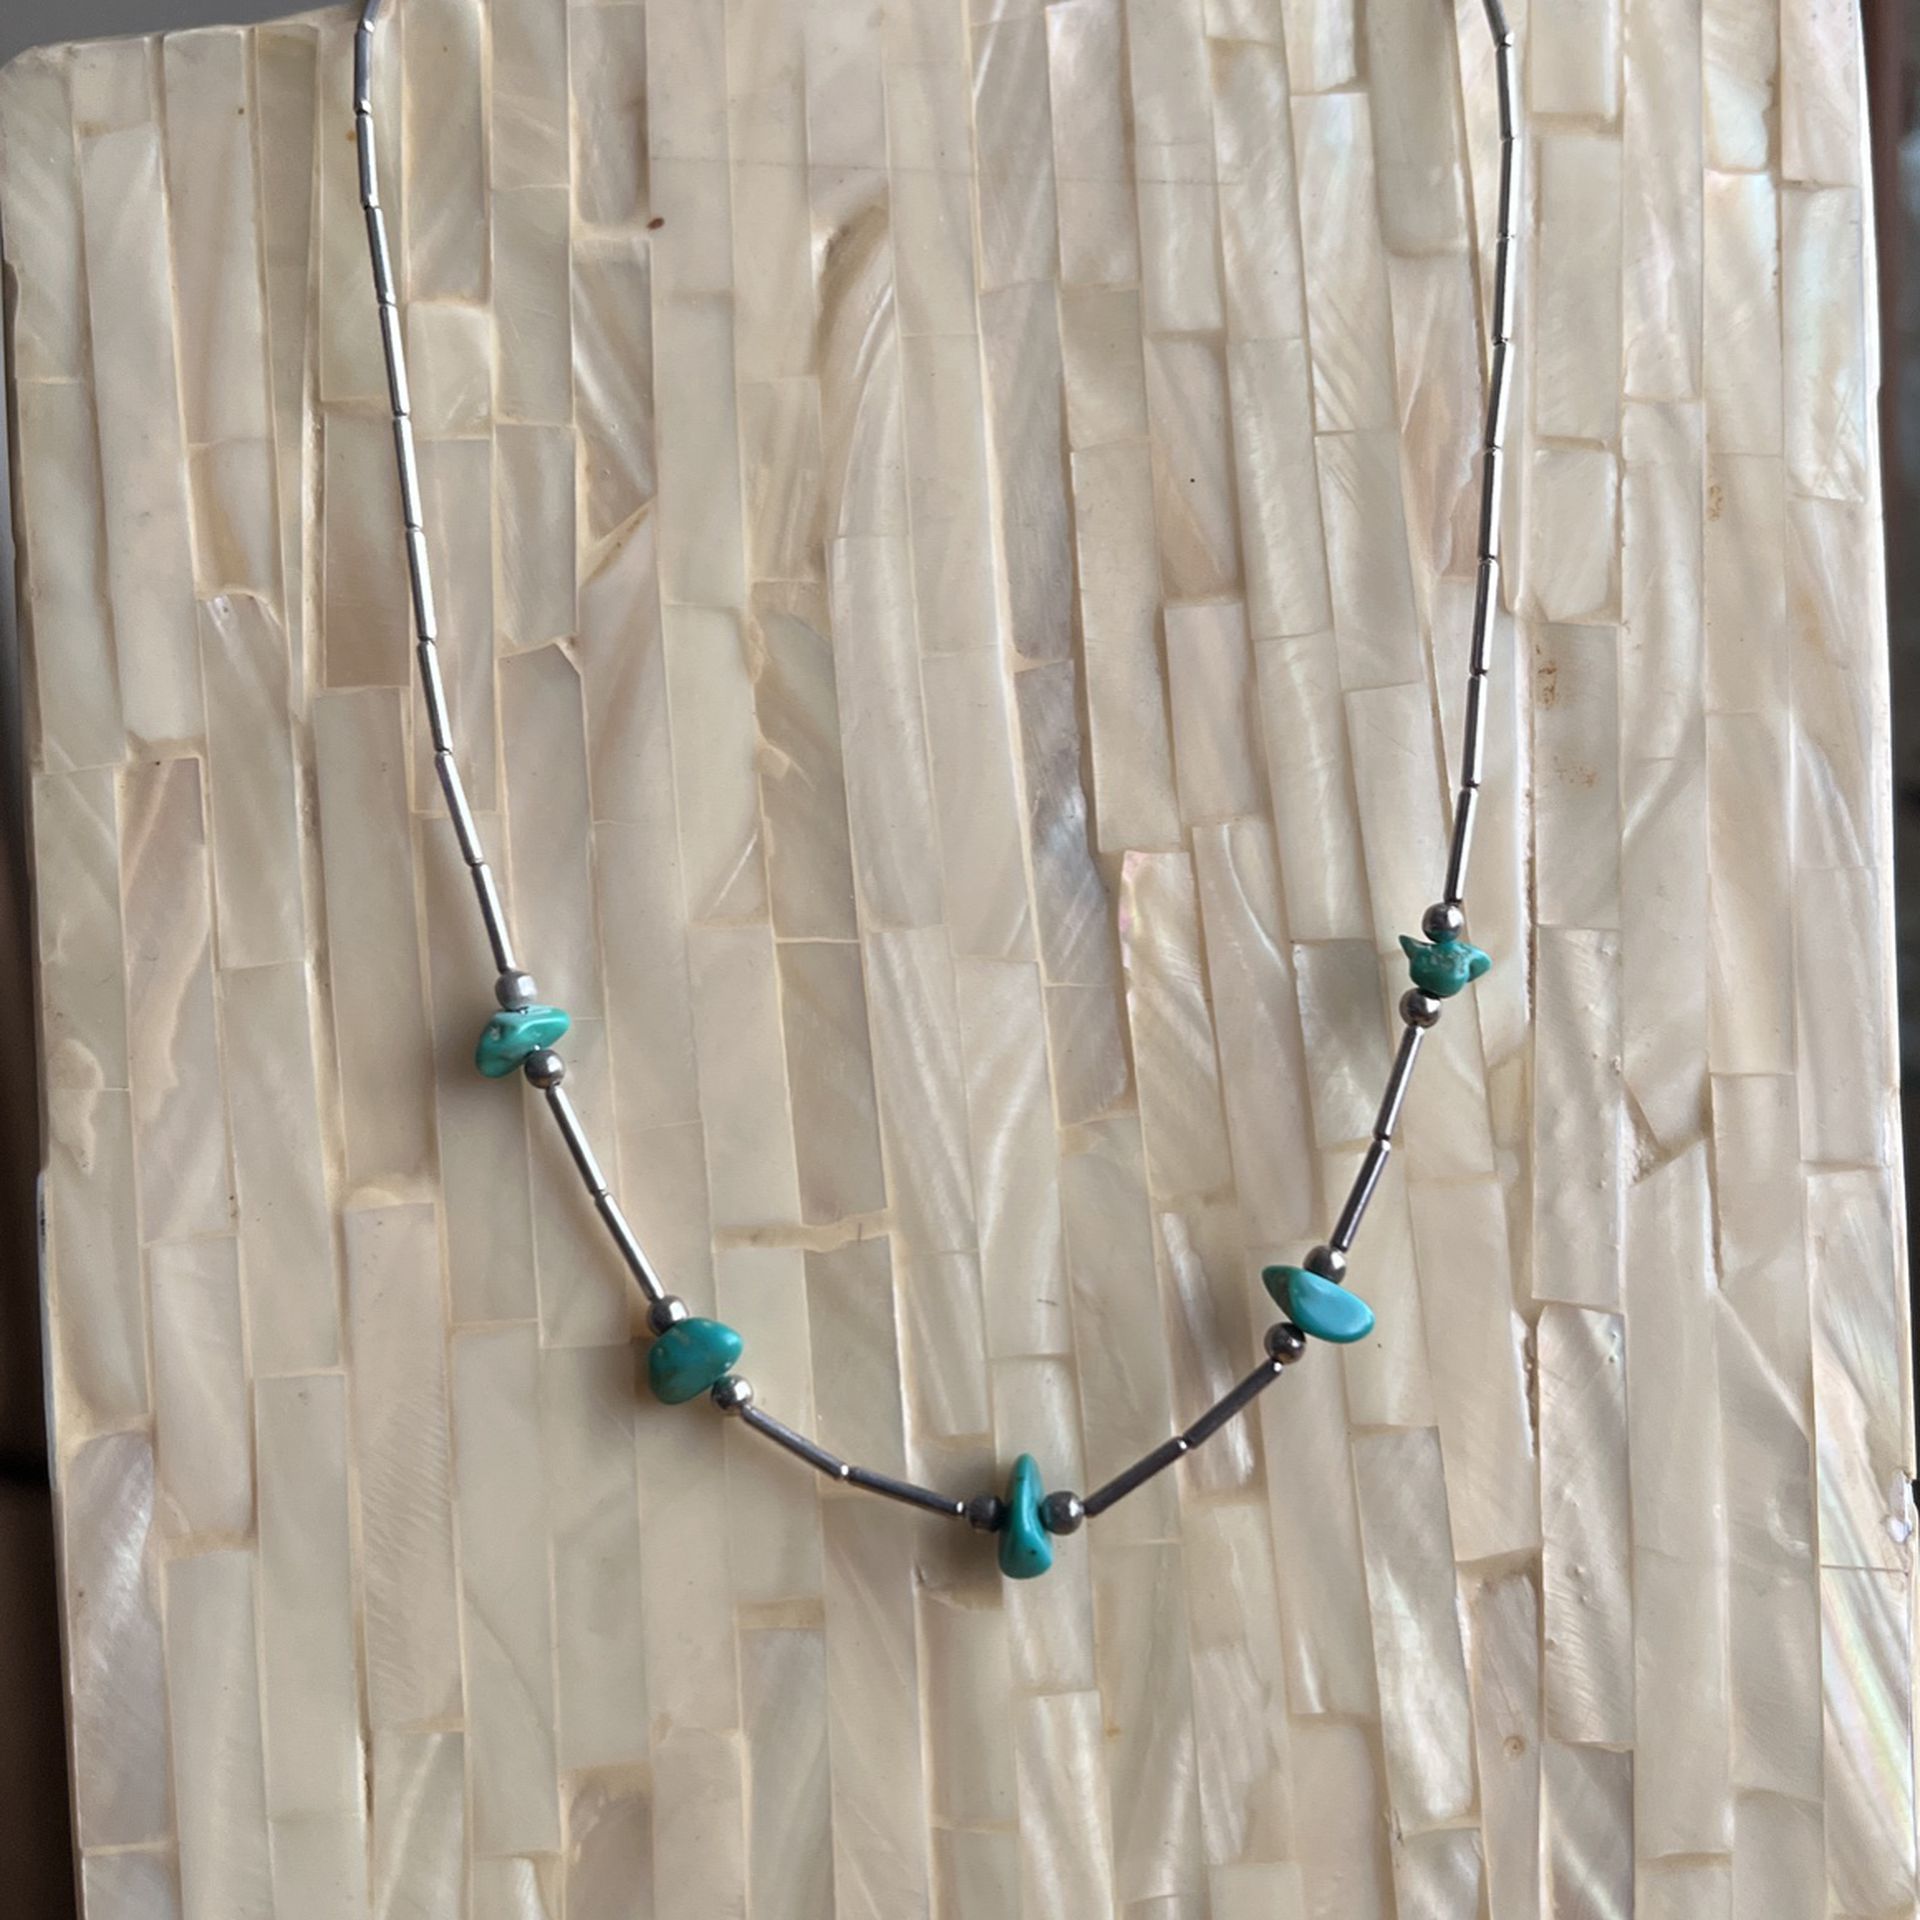 Liquid Silver Necklace With Turquoise Stones